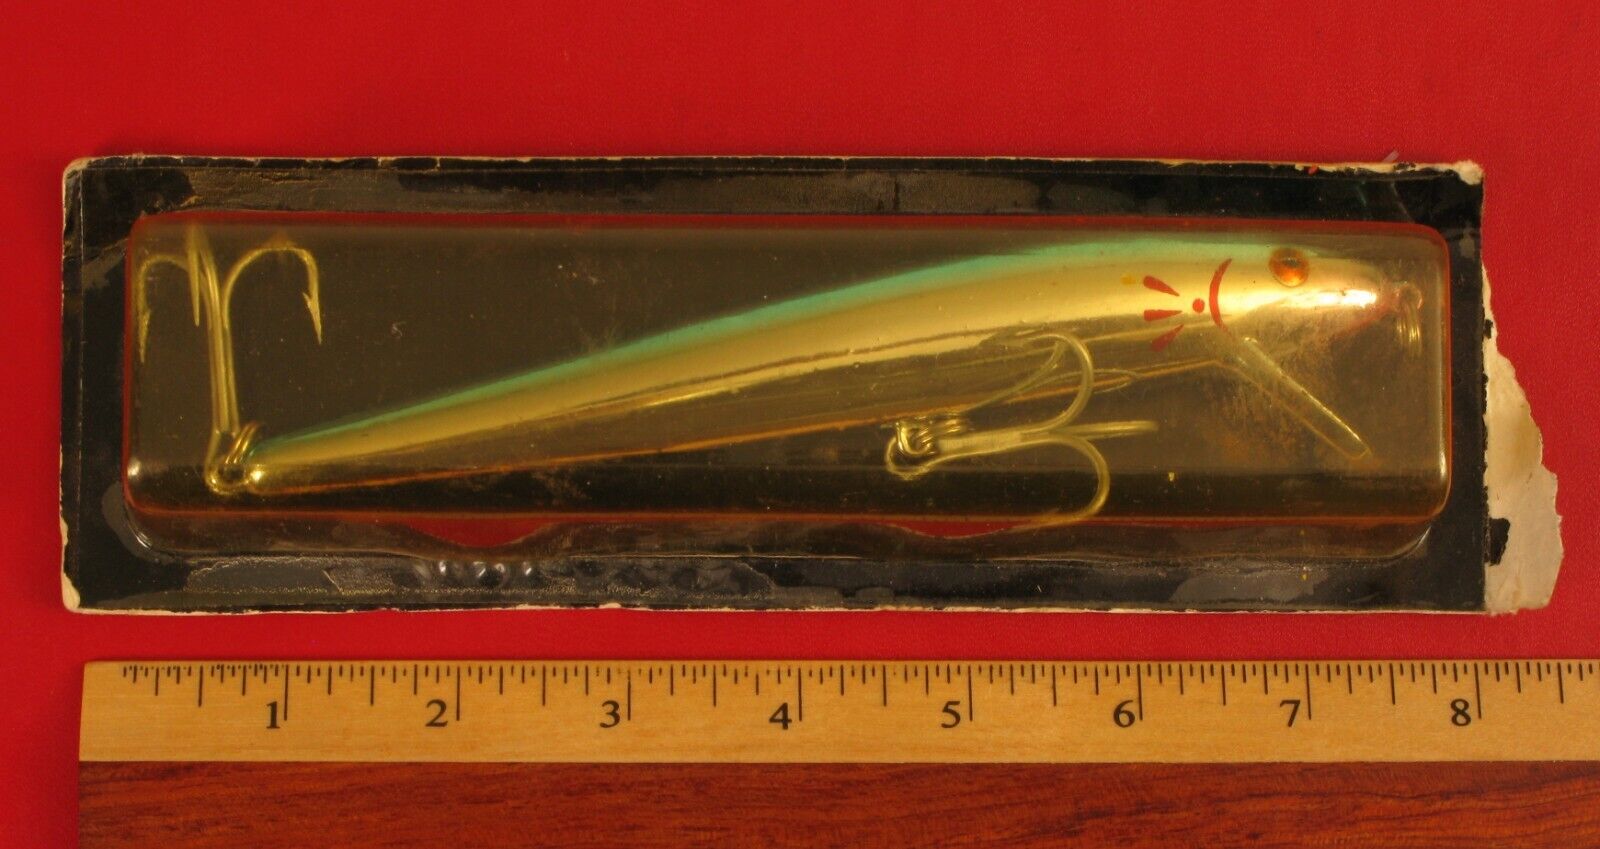 VINTAGE 1984 DATED CORDELL SILVER FISHING LURE MEDIUM DIVER LARGE LUNKER SIZE 